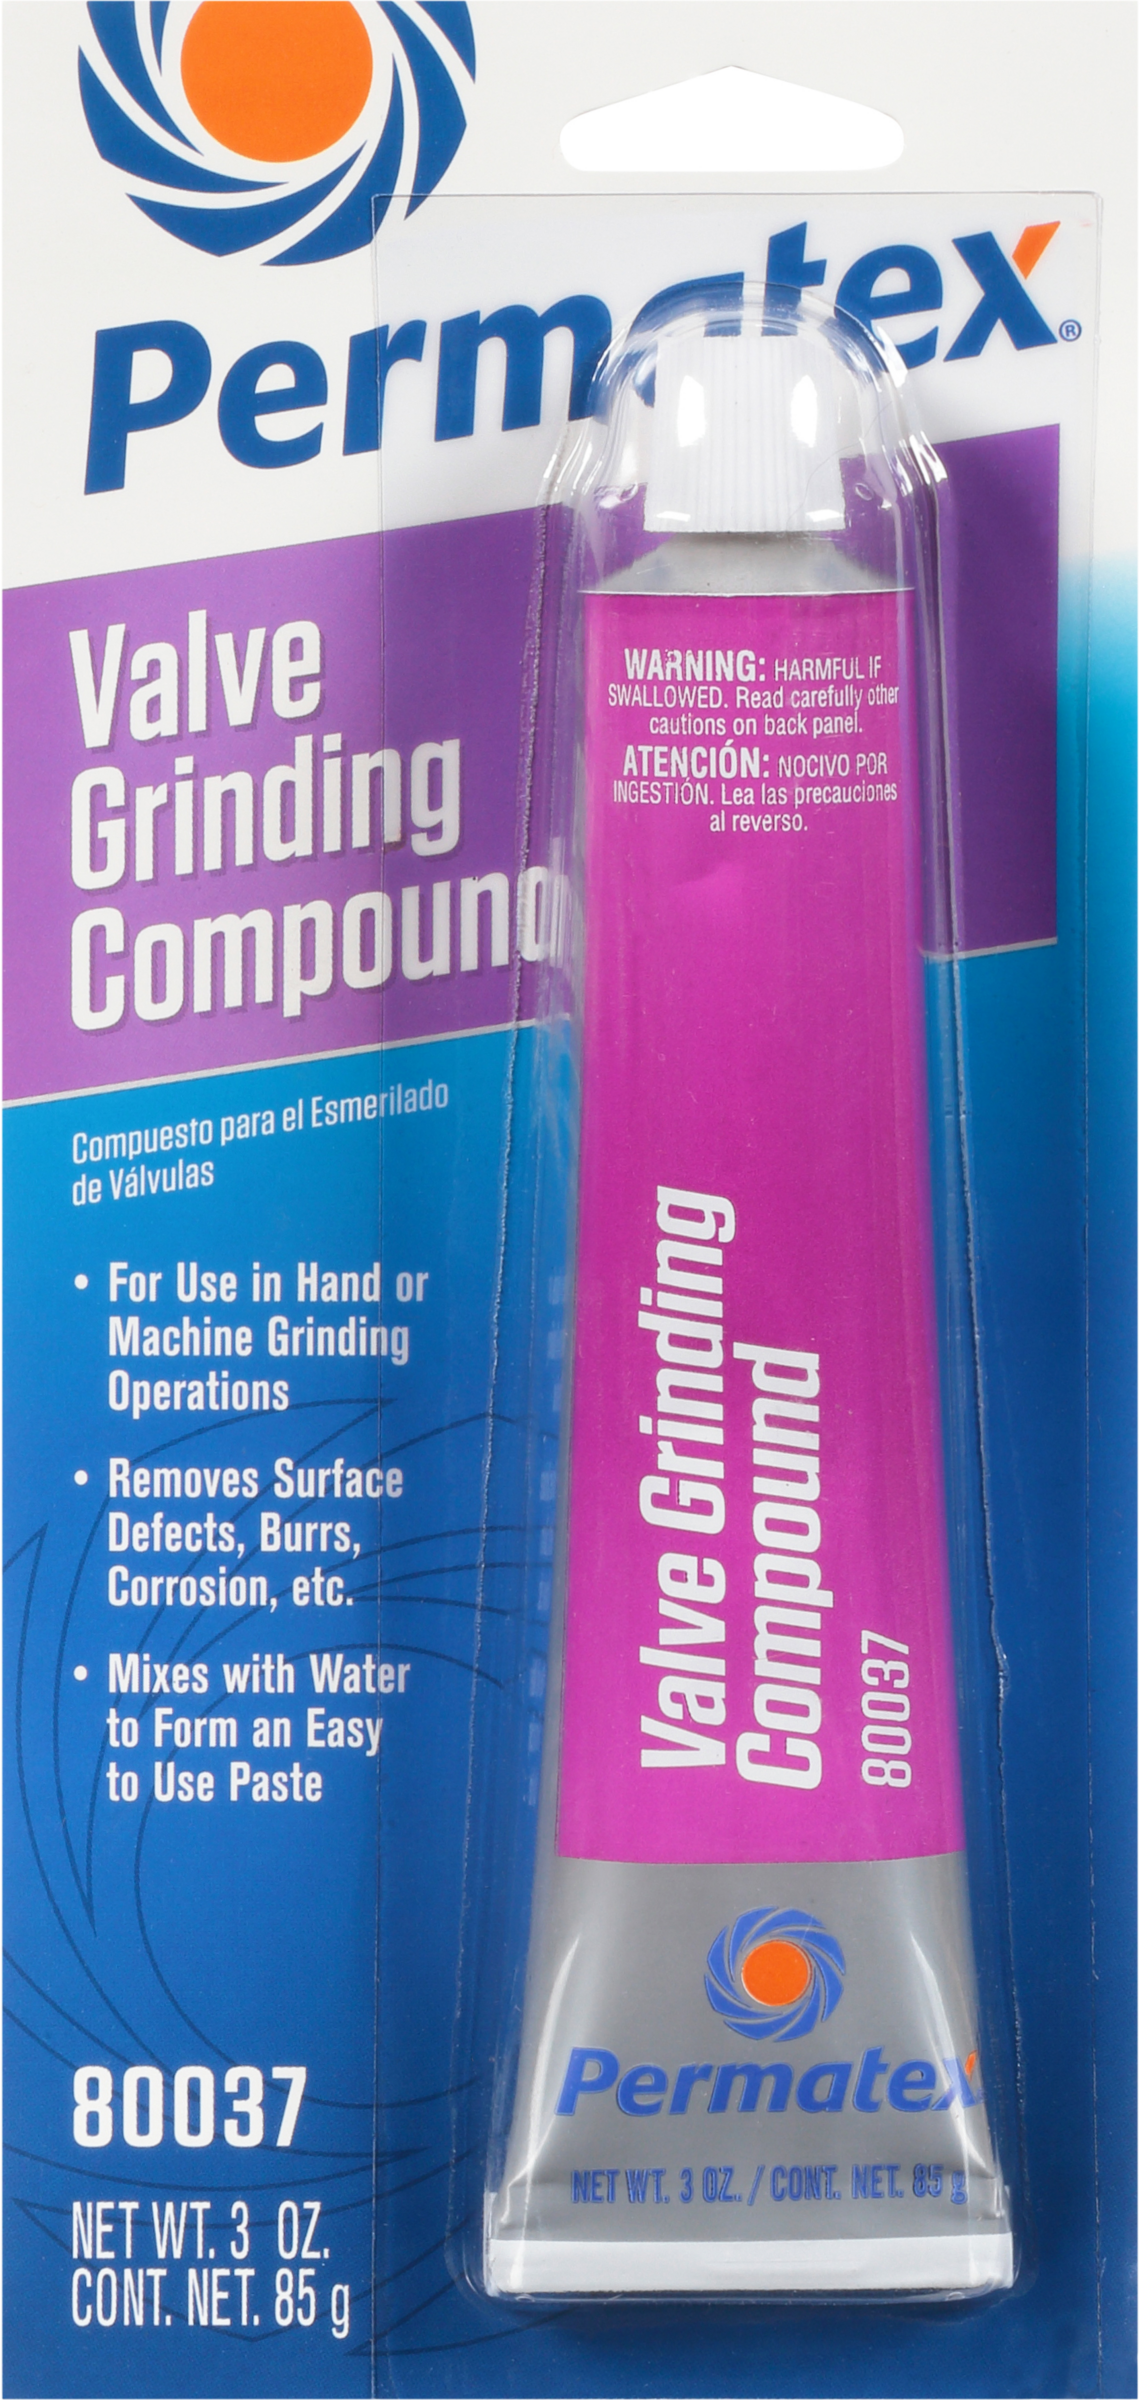 Permatex Valve Grinding Compound Available at